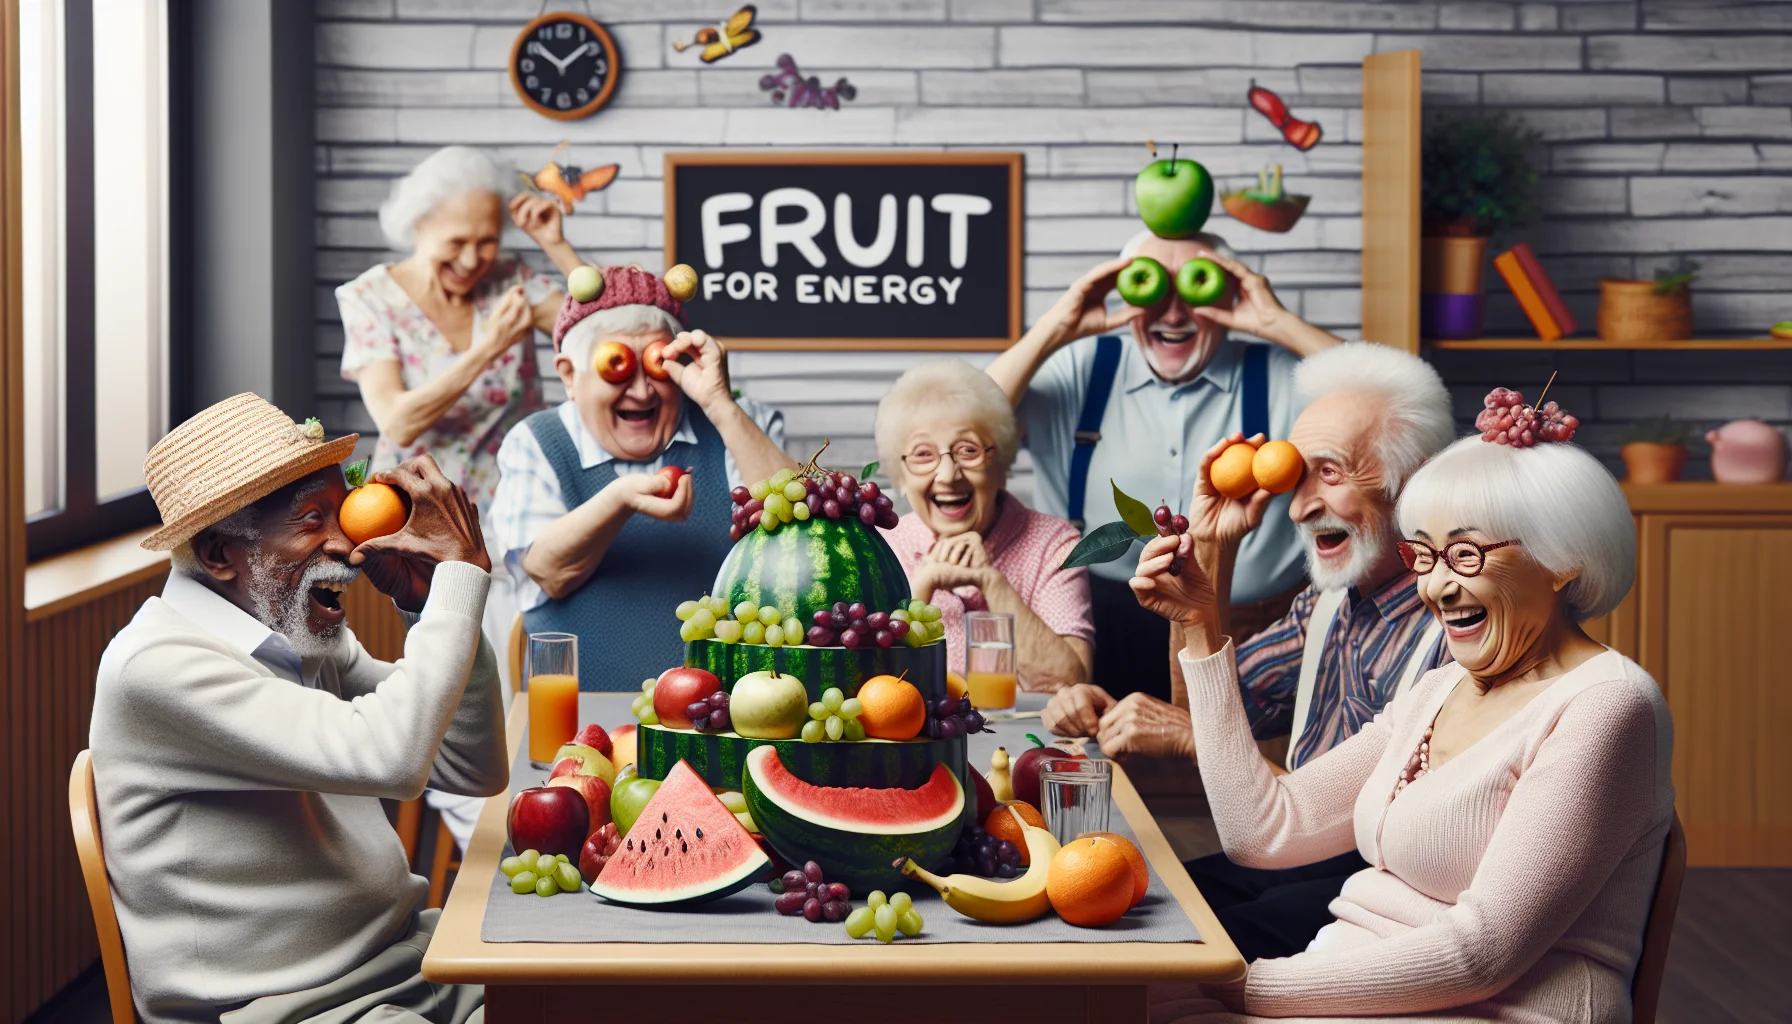 Imagine a humorous setting in retirement home cafeteria. A diverse group of elderly people are seated around a table filled with nutritious fruits. An African senior man is playfully trying to juggle apple, pear, and orange, while an Asian senior woman peers through a hollowed-out watermelon like a pair of binoculars. A White elderly lady is wearing a hat embellished with grapes and a banana as the crown, chuckling at the scene. In the corner, a Middle Eastern man and a Hispanic woman are laughing as they build an elaborate tower from various fruit. Sign that says 'Fruit for Energy' hangs comically tilted on the wall.